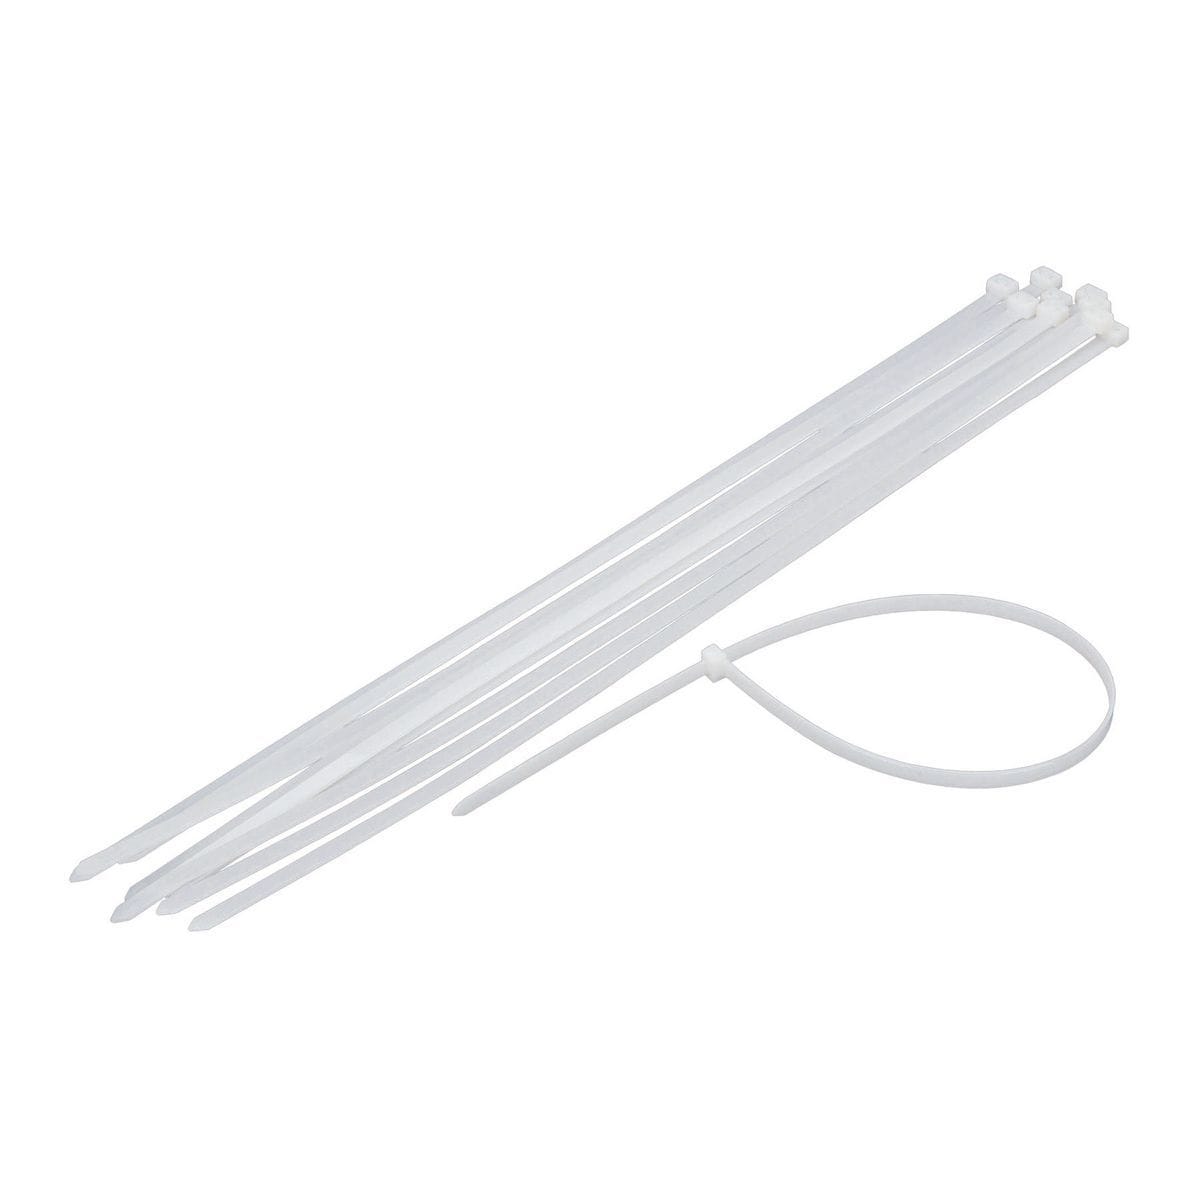 Fulgore Plastic Cable Ties (White) - These Zip Ties bundles your cables and wires together to keep them organized and prevent damage (10pcs) - FU1394